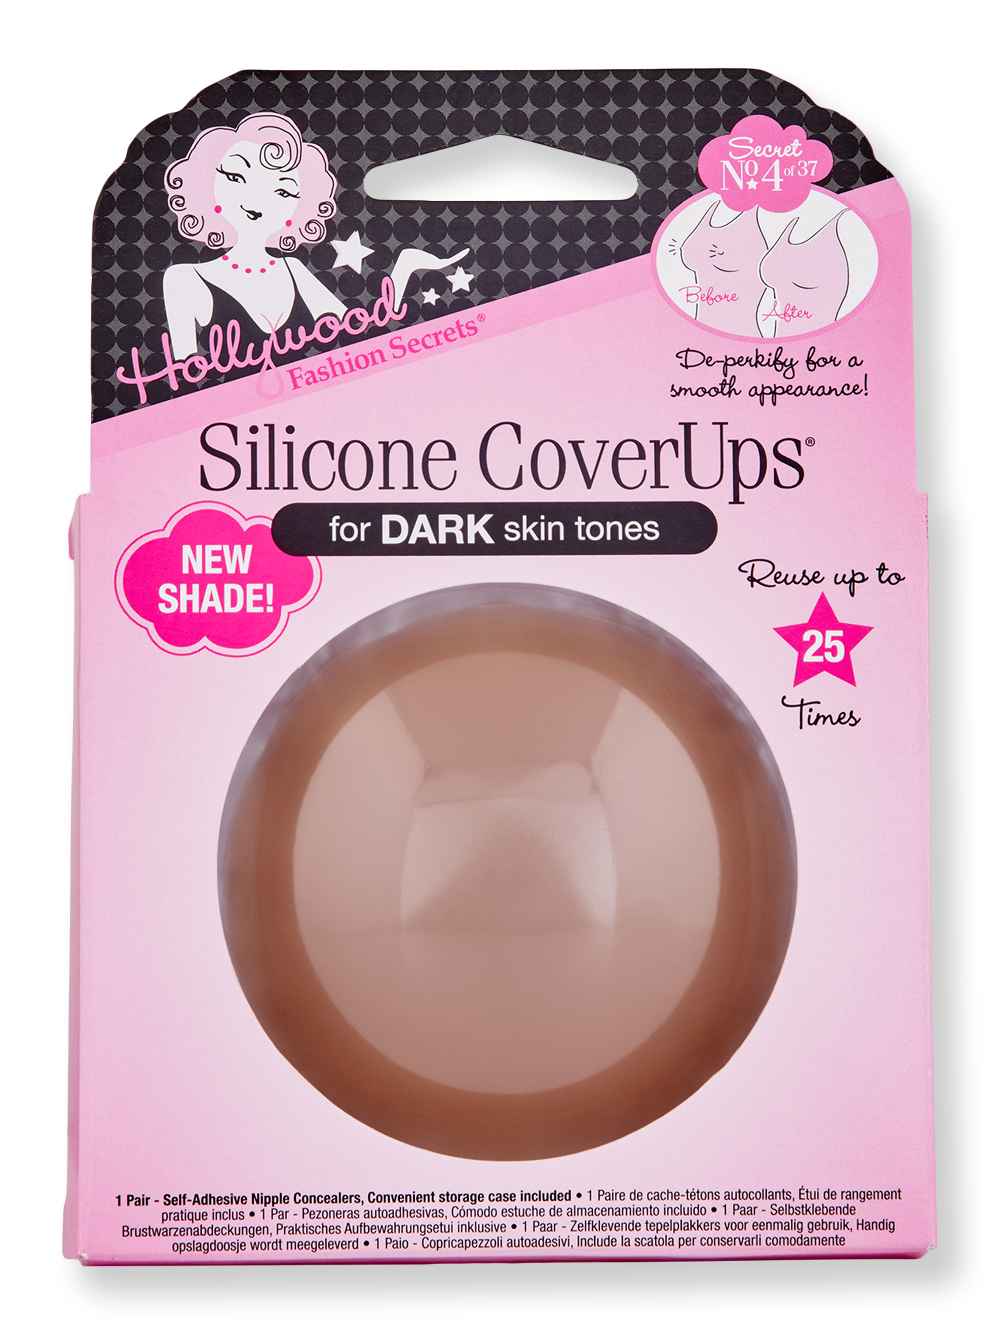 Hollywood Fashion Secrects Silicone Contour Cups - Size 4 